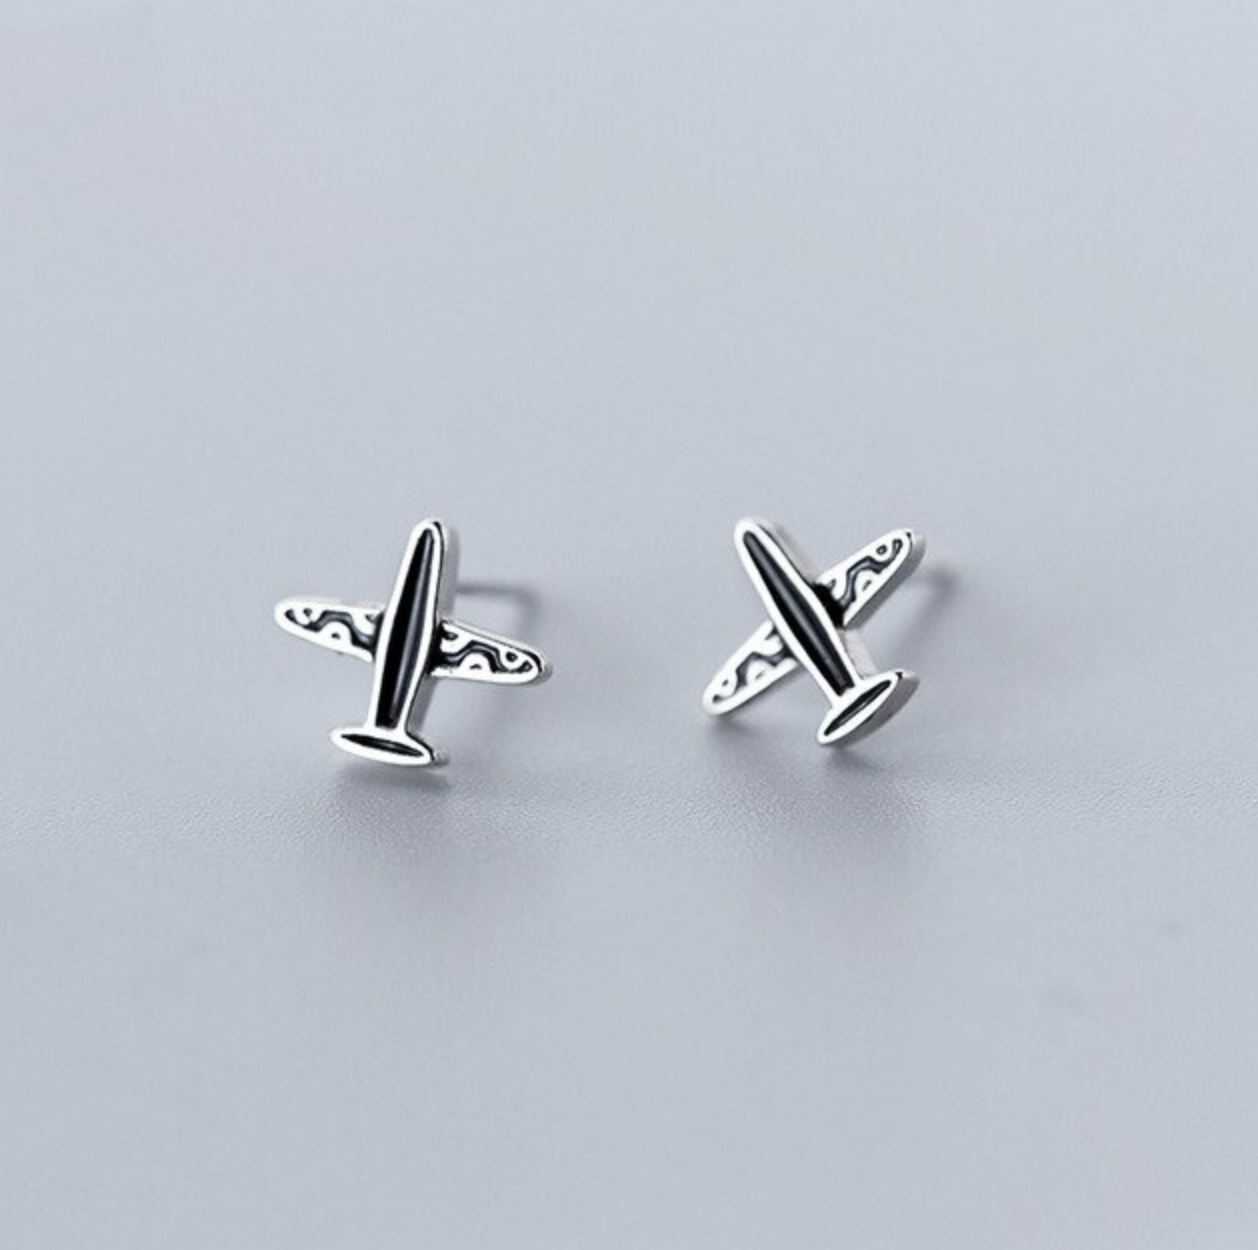 Special Designed 925 Sterling Silver Airplane Earrings